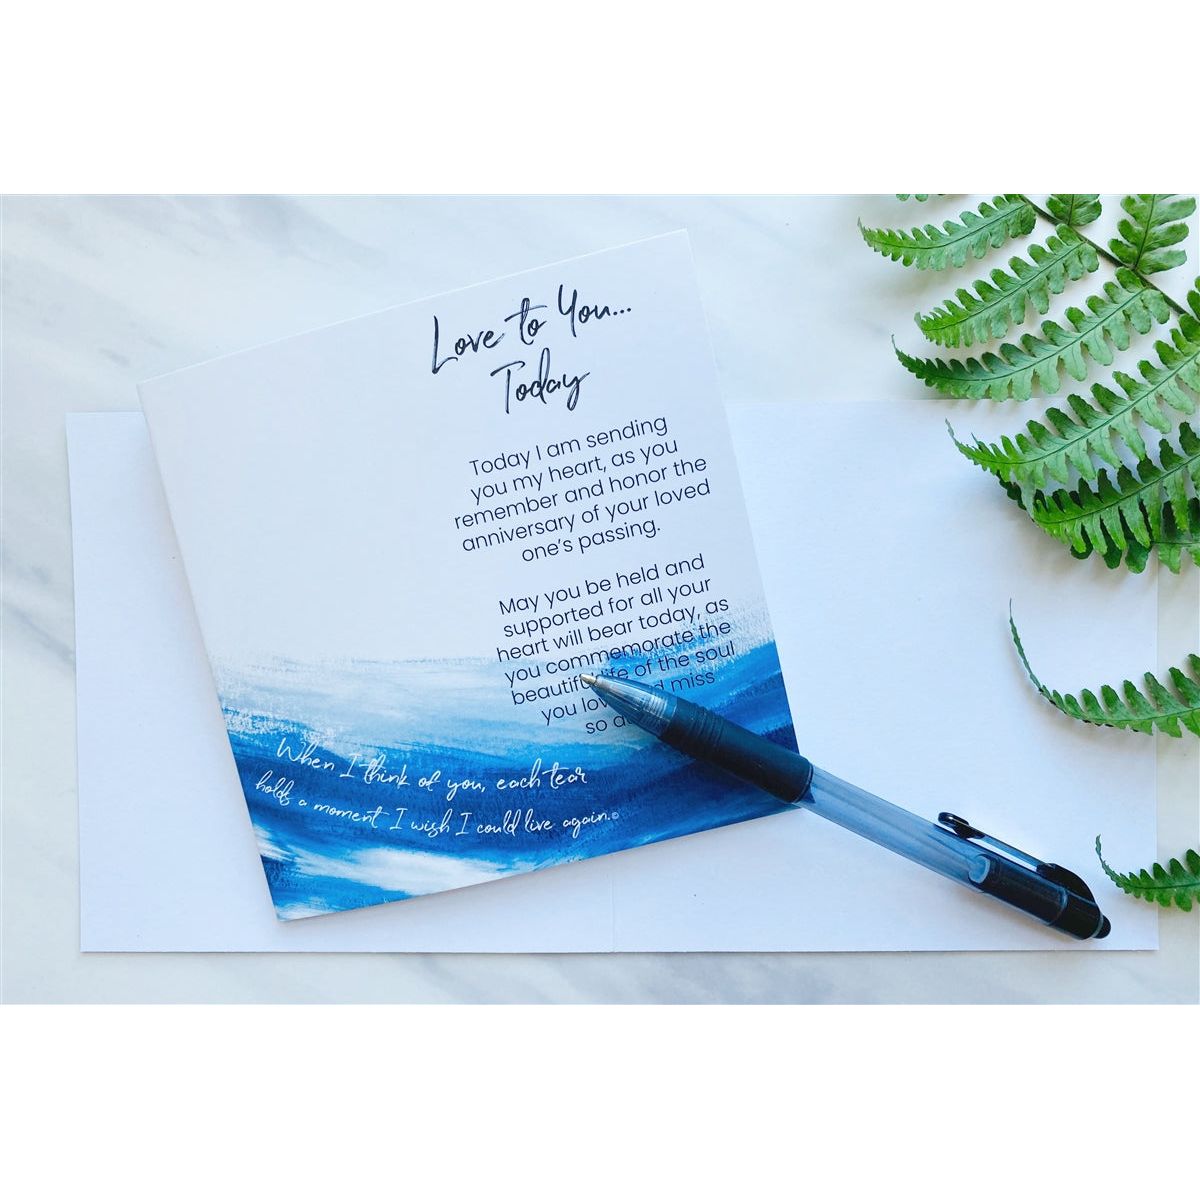 &quot;Love to You... Today&quot; folding card that can be written in by giver.